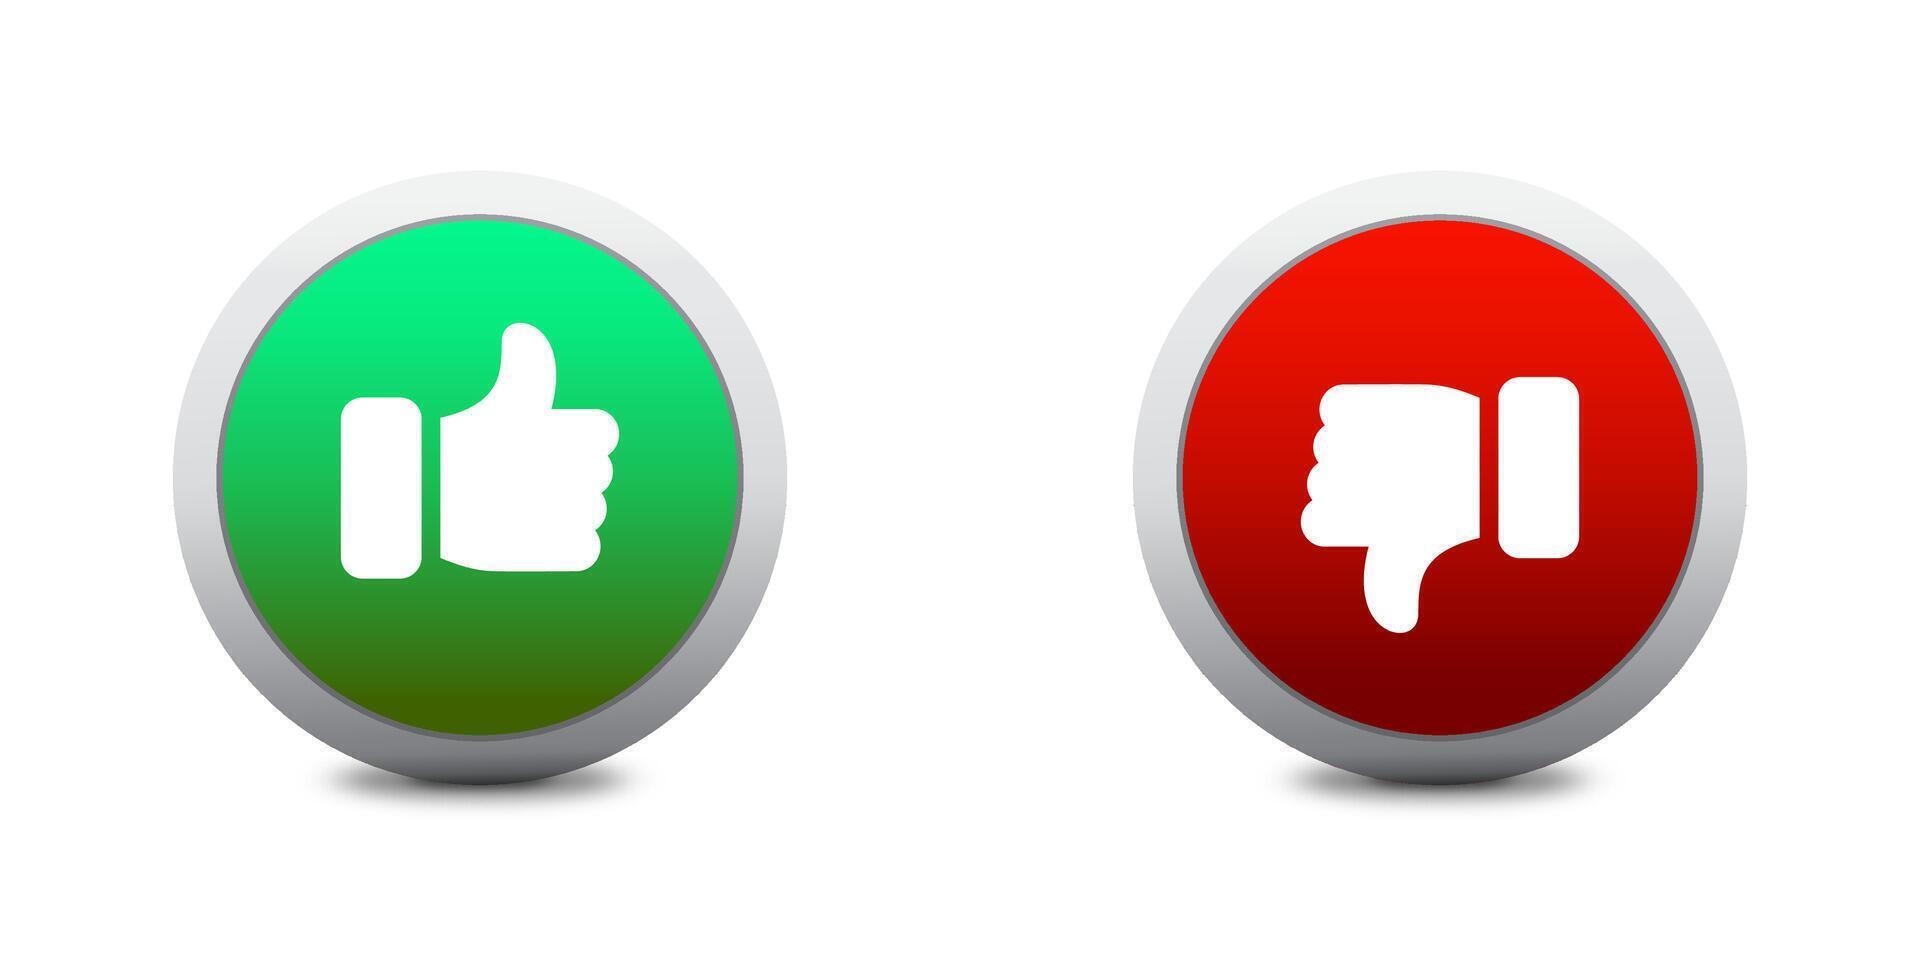 Thumb up and down red and green icons. Like amd dislike round buttons with shadows under it. Flat vector illustration.